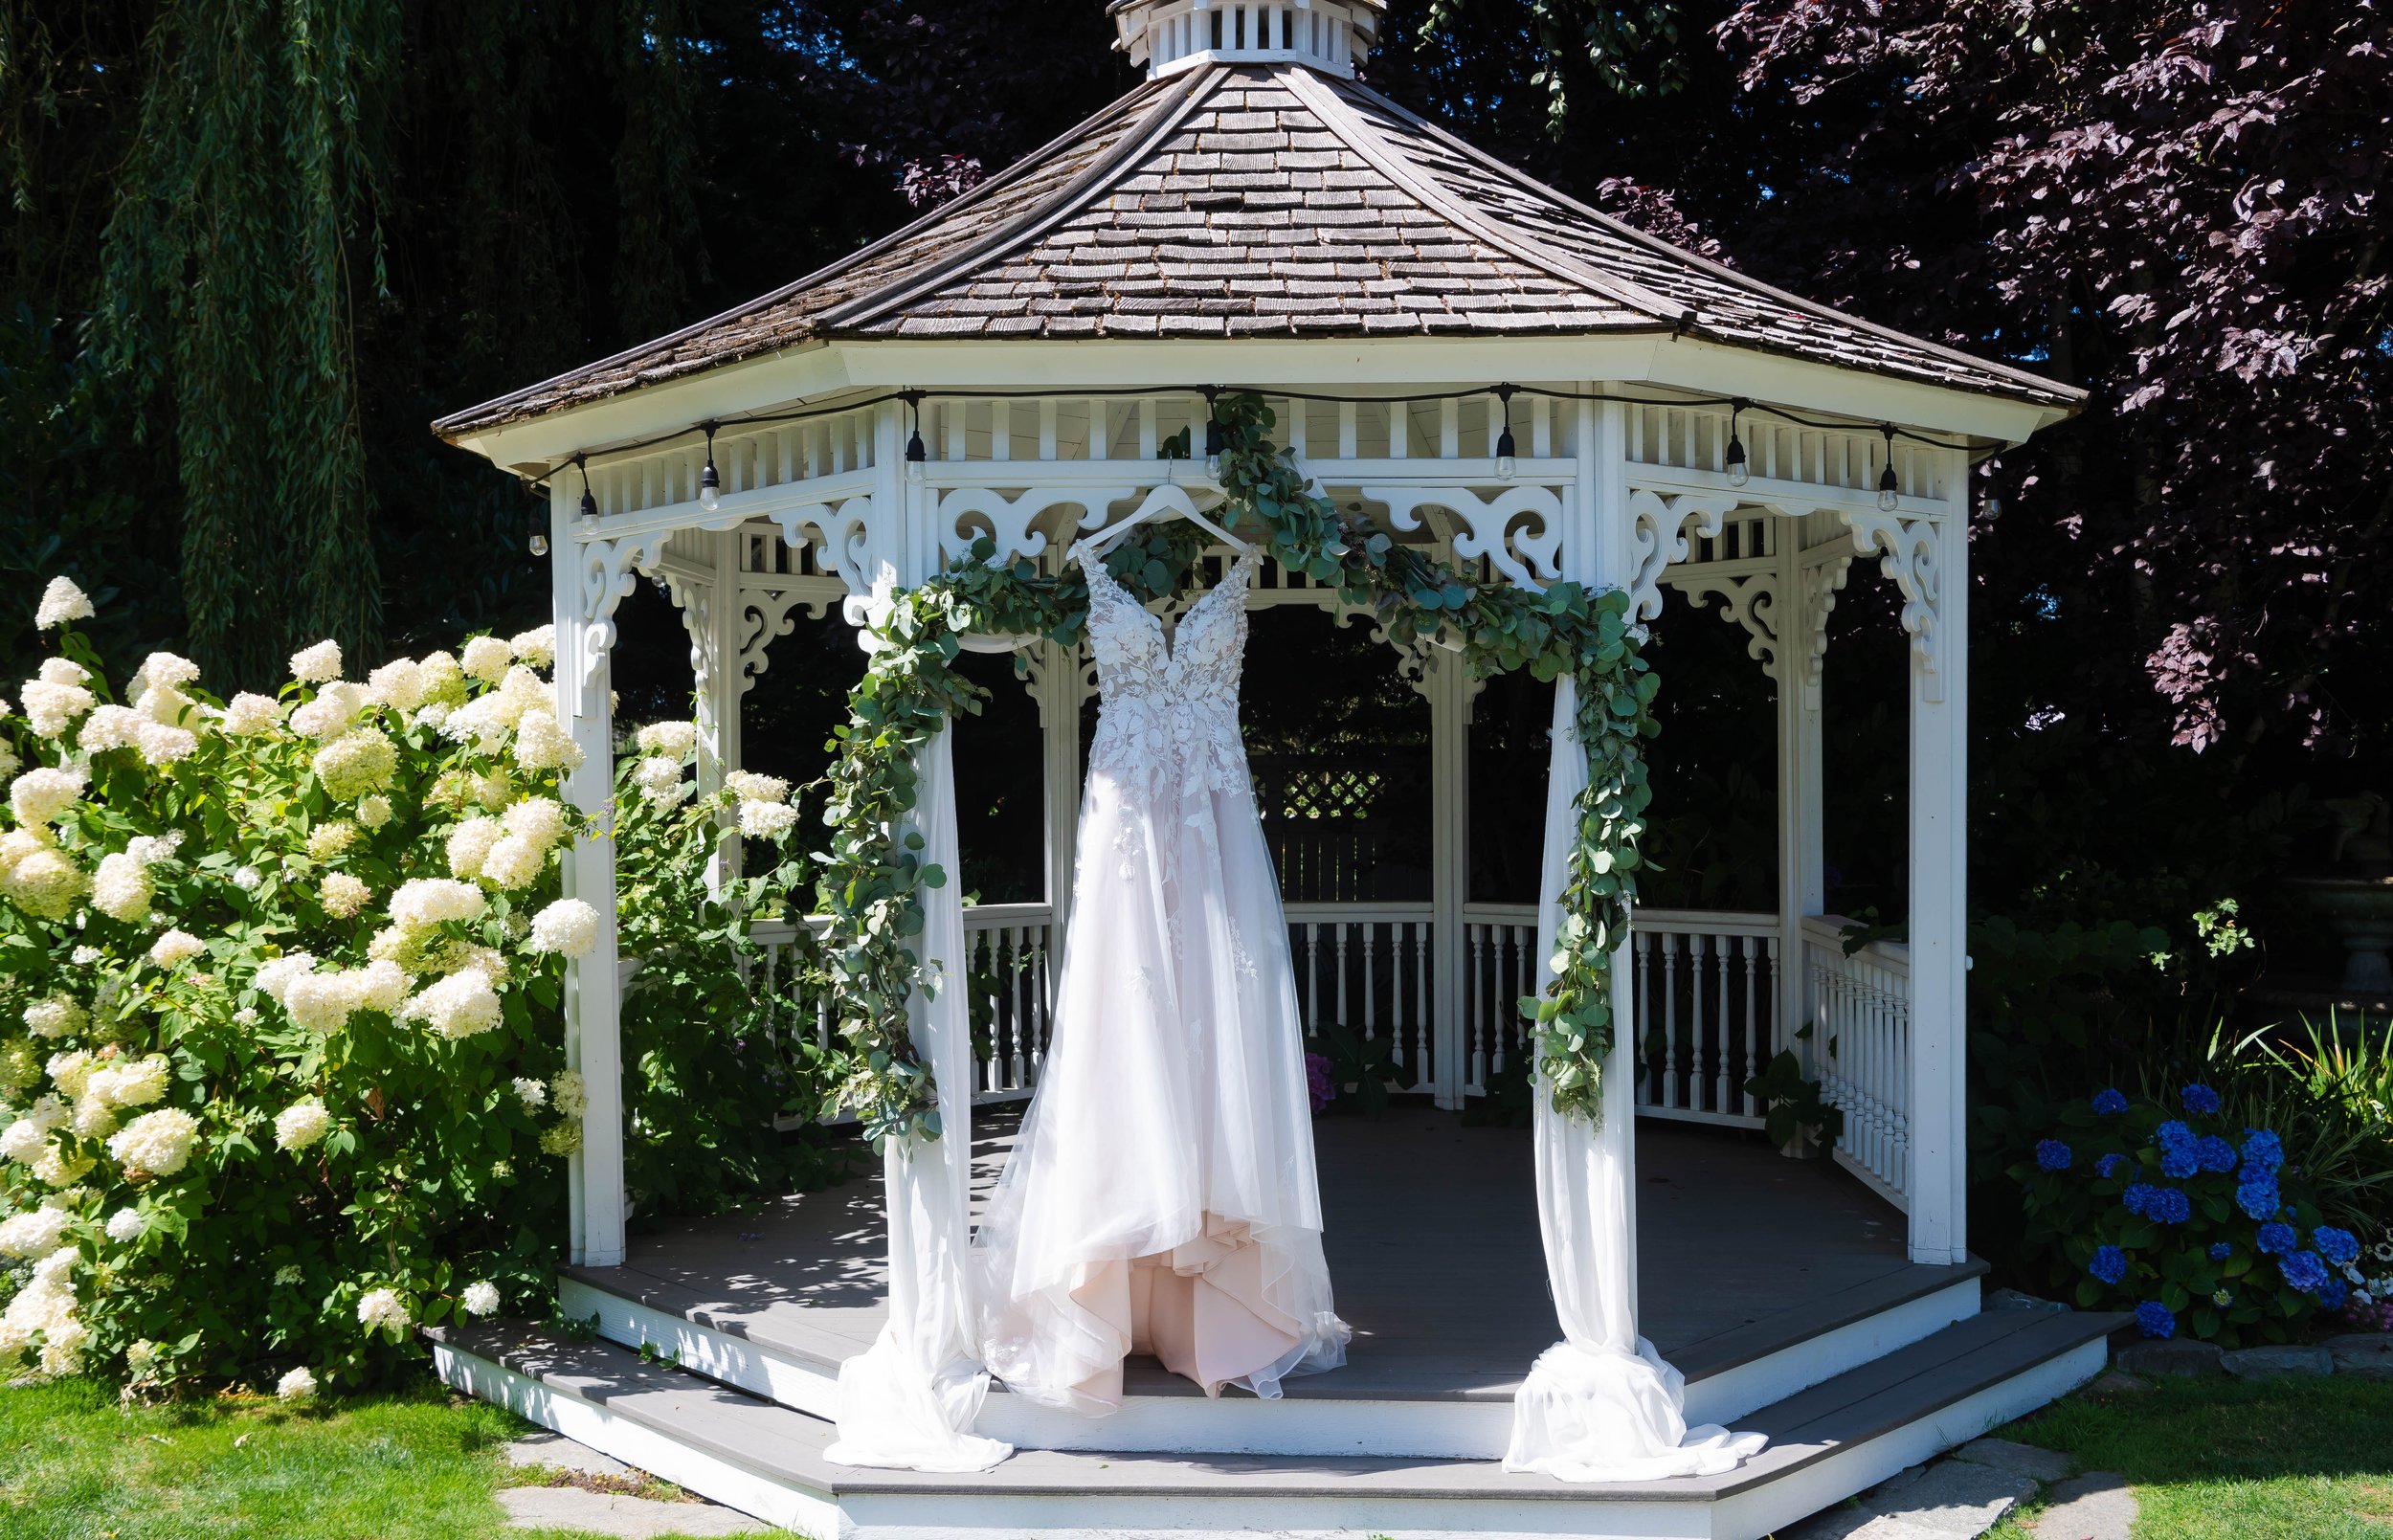  Wedding Gown on Display in front of a gazebo 